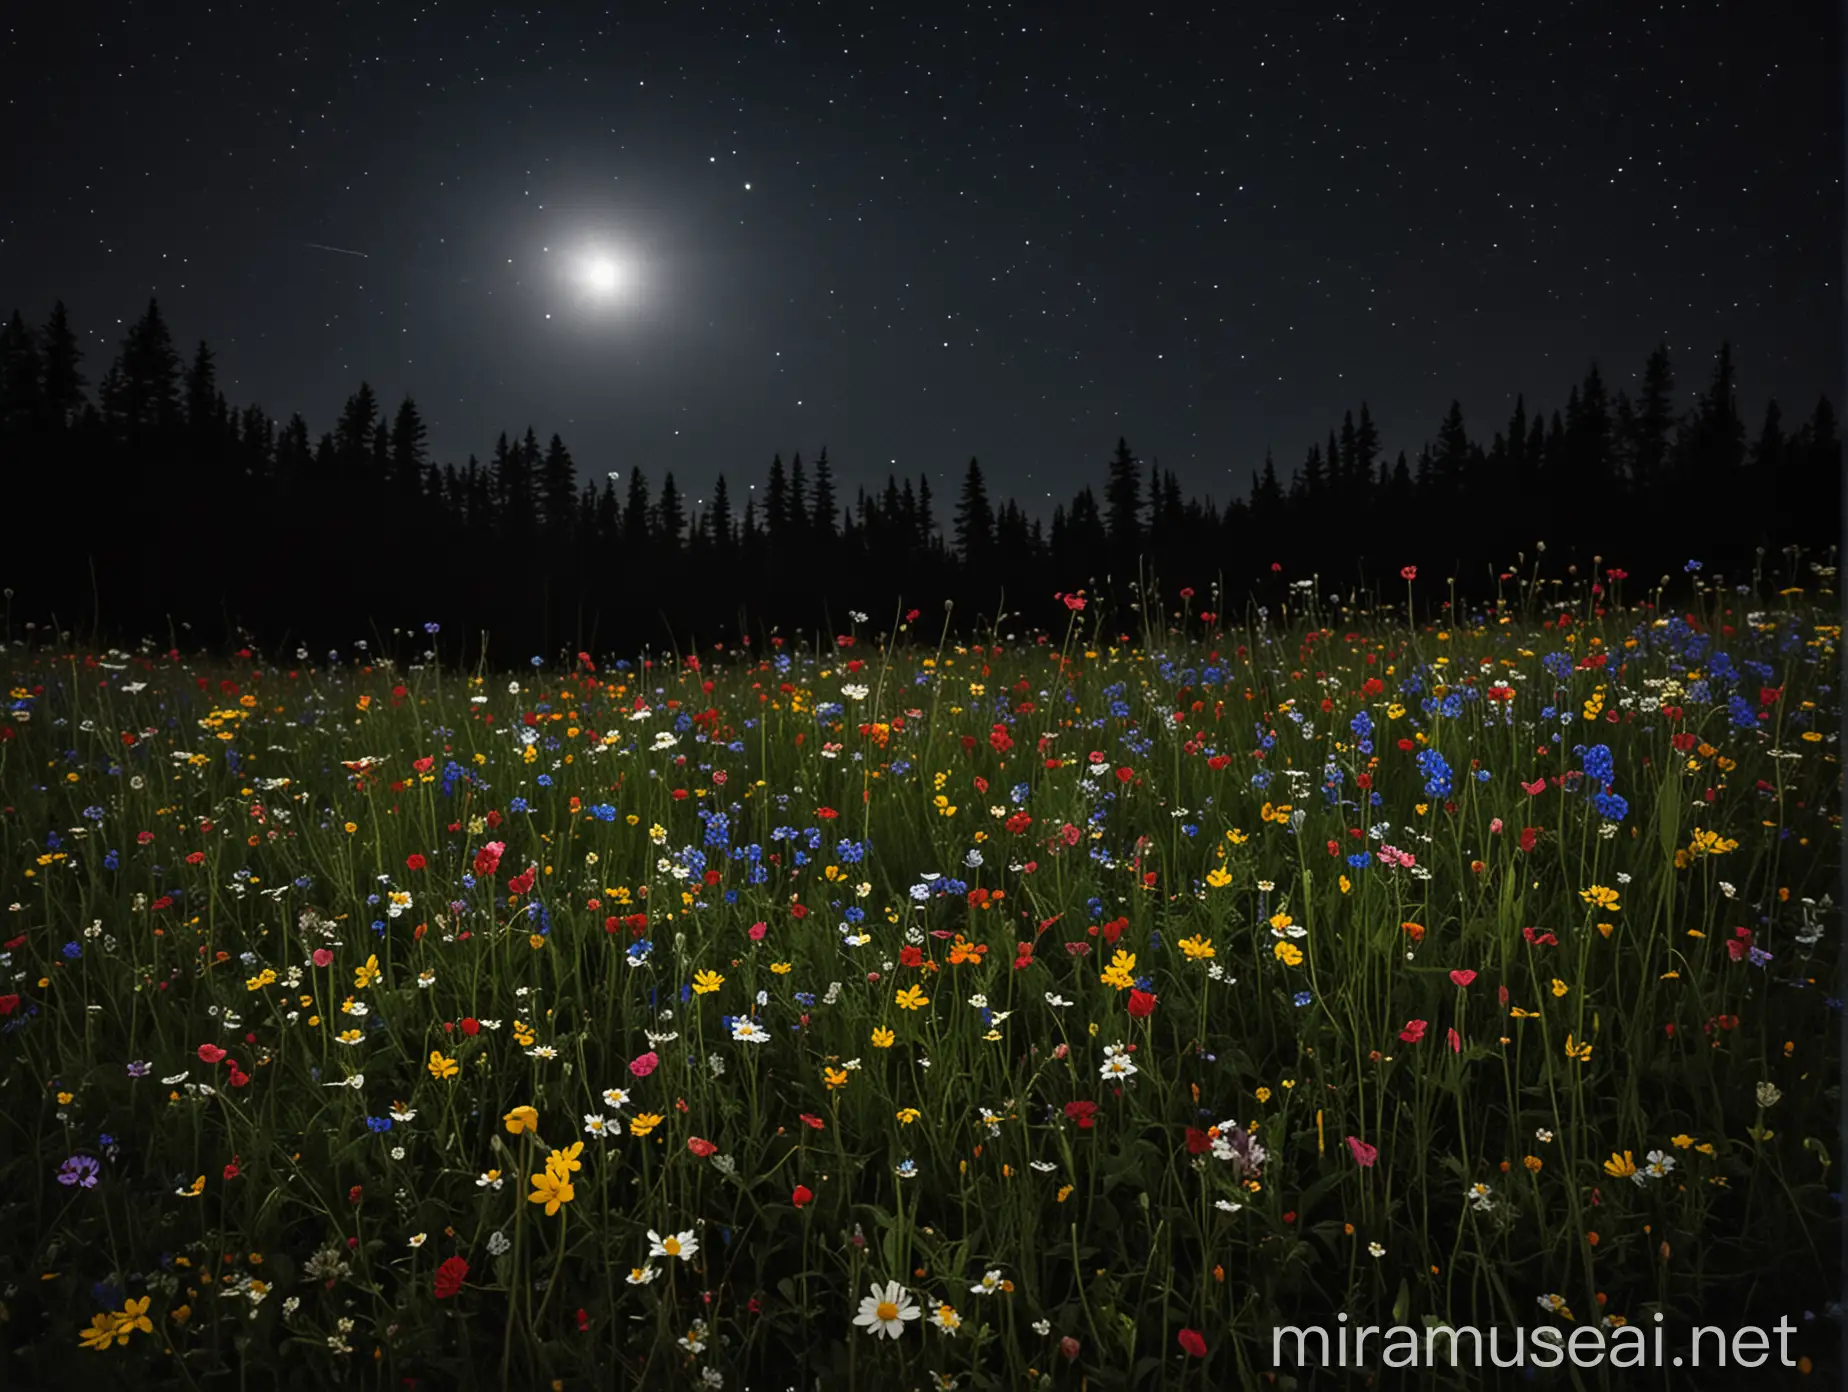 Vibrant Wildflowers Blossoming Under the Moonlight